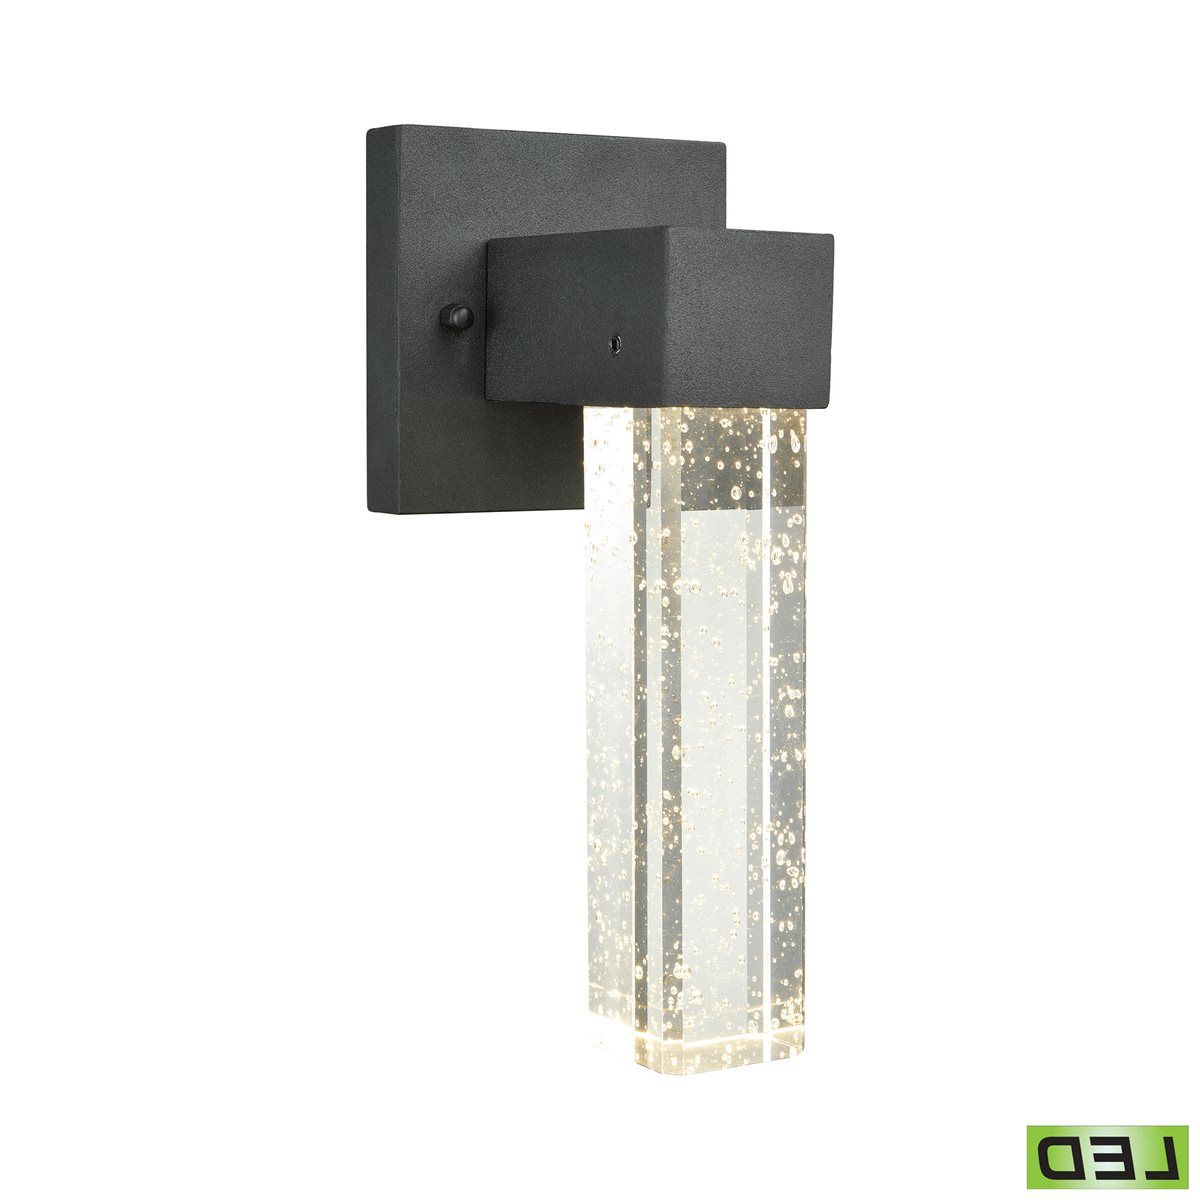 Widely Used Emode Dimmable Led Outdoor Wall Sconce In Matte Black With In Keikilani Matte Black Wall Lighting (View 5 of 20)